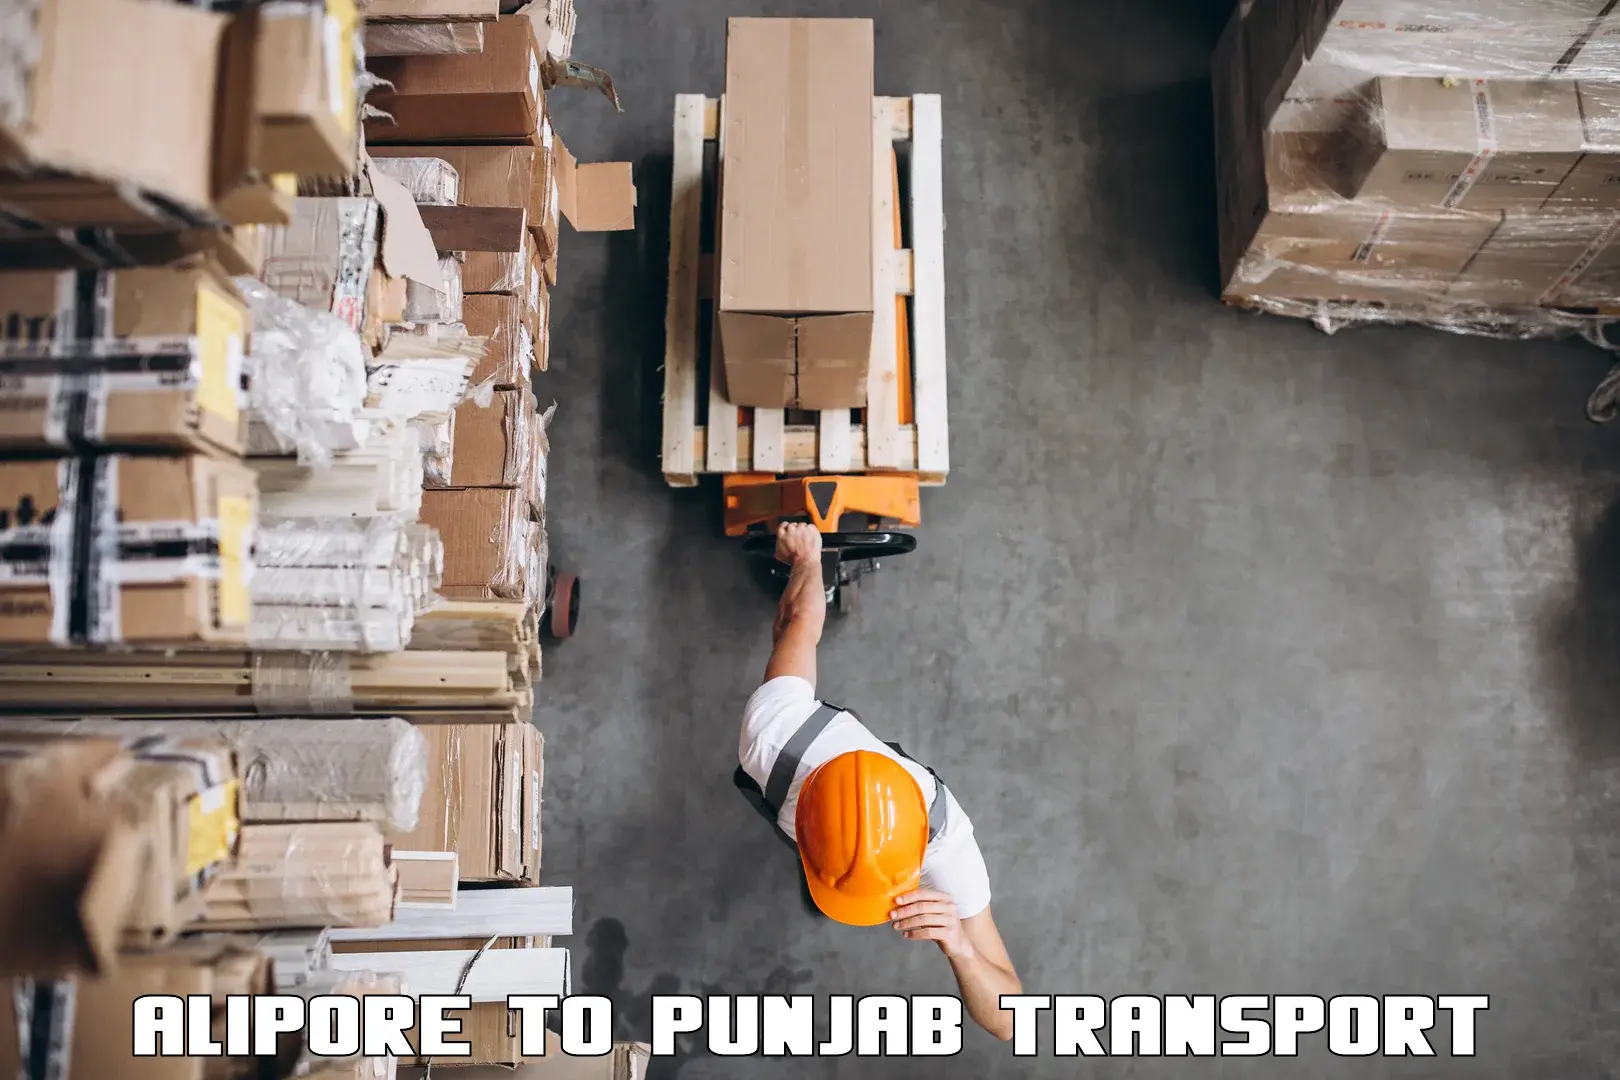 Commercial transport service Alipore to Mohali